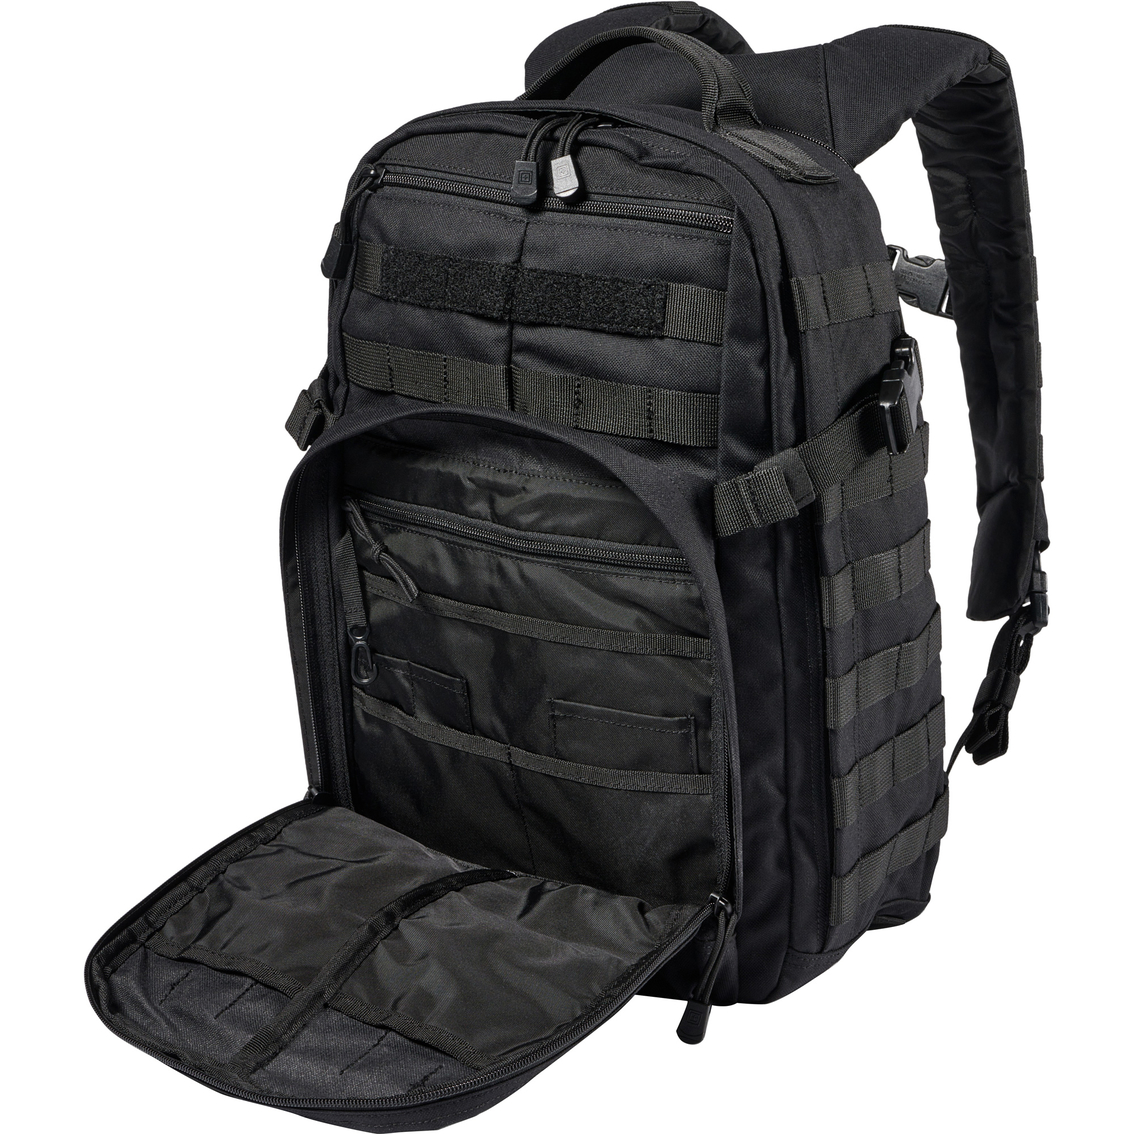 5.11 RUSH 12 2.0 Backpack - Image 8 of 10